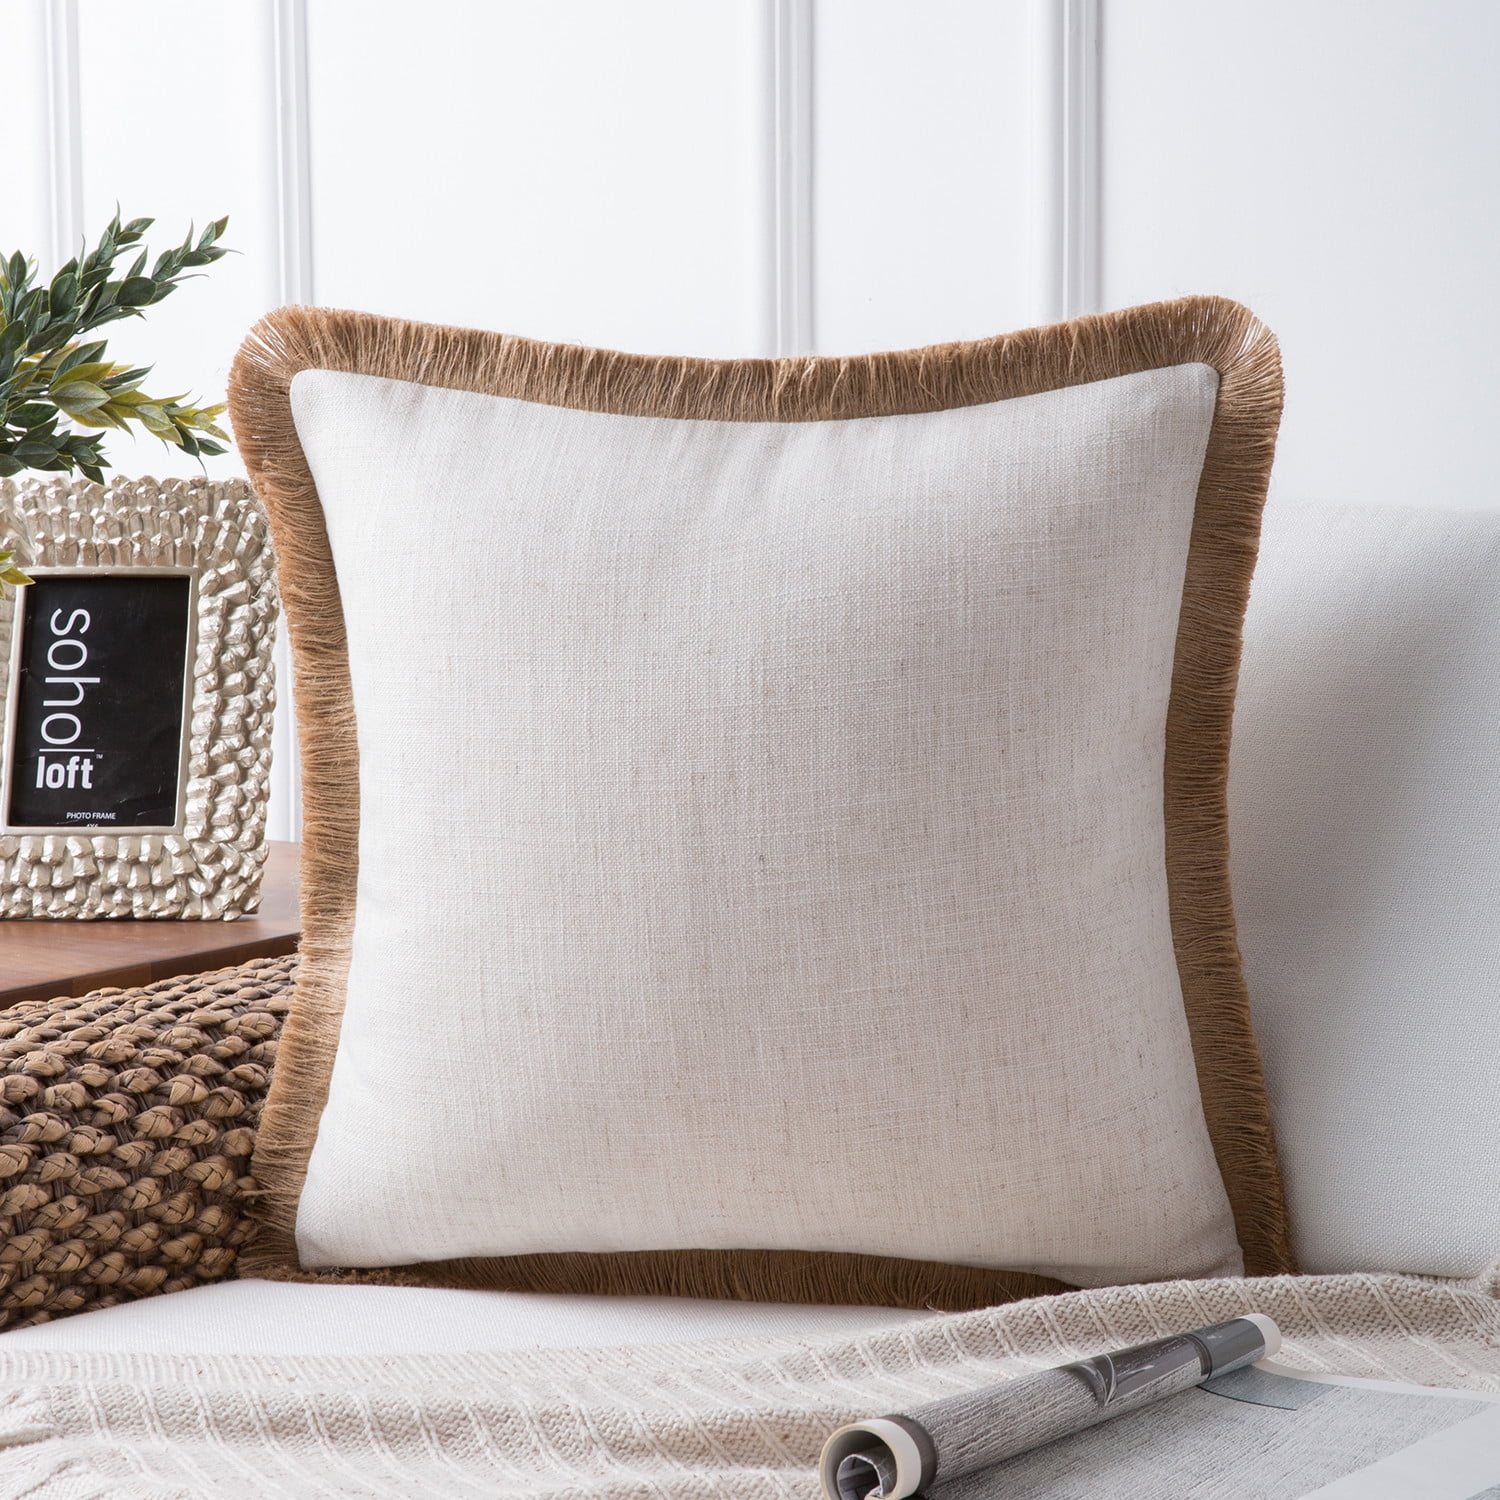 The Home Index - Pillows, Throws & Baskets, Furniture And Unique Gift Store